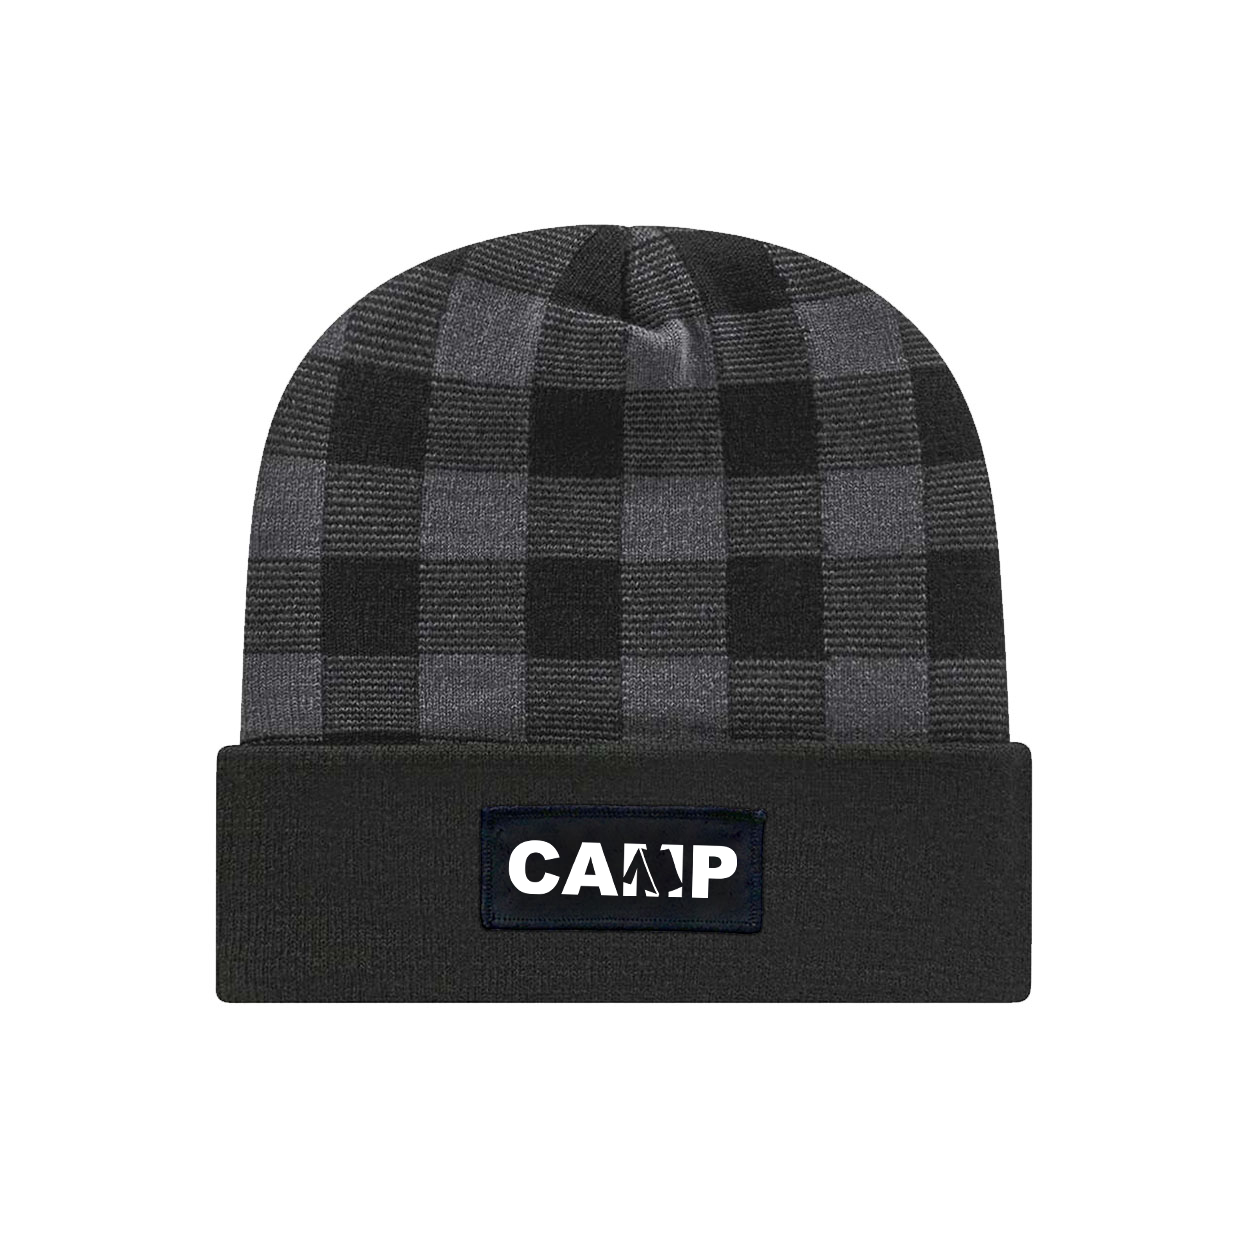 Camp Tent Logo Night Out Woven Patch Roll Up Plaid Beanie Black/Heather Gray (White Logo)